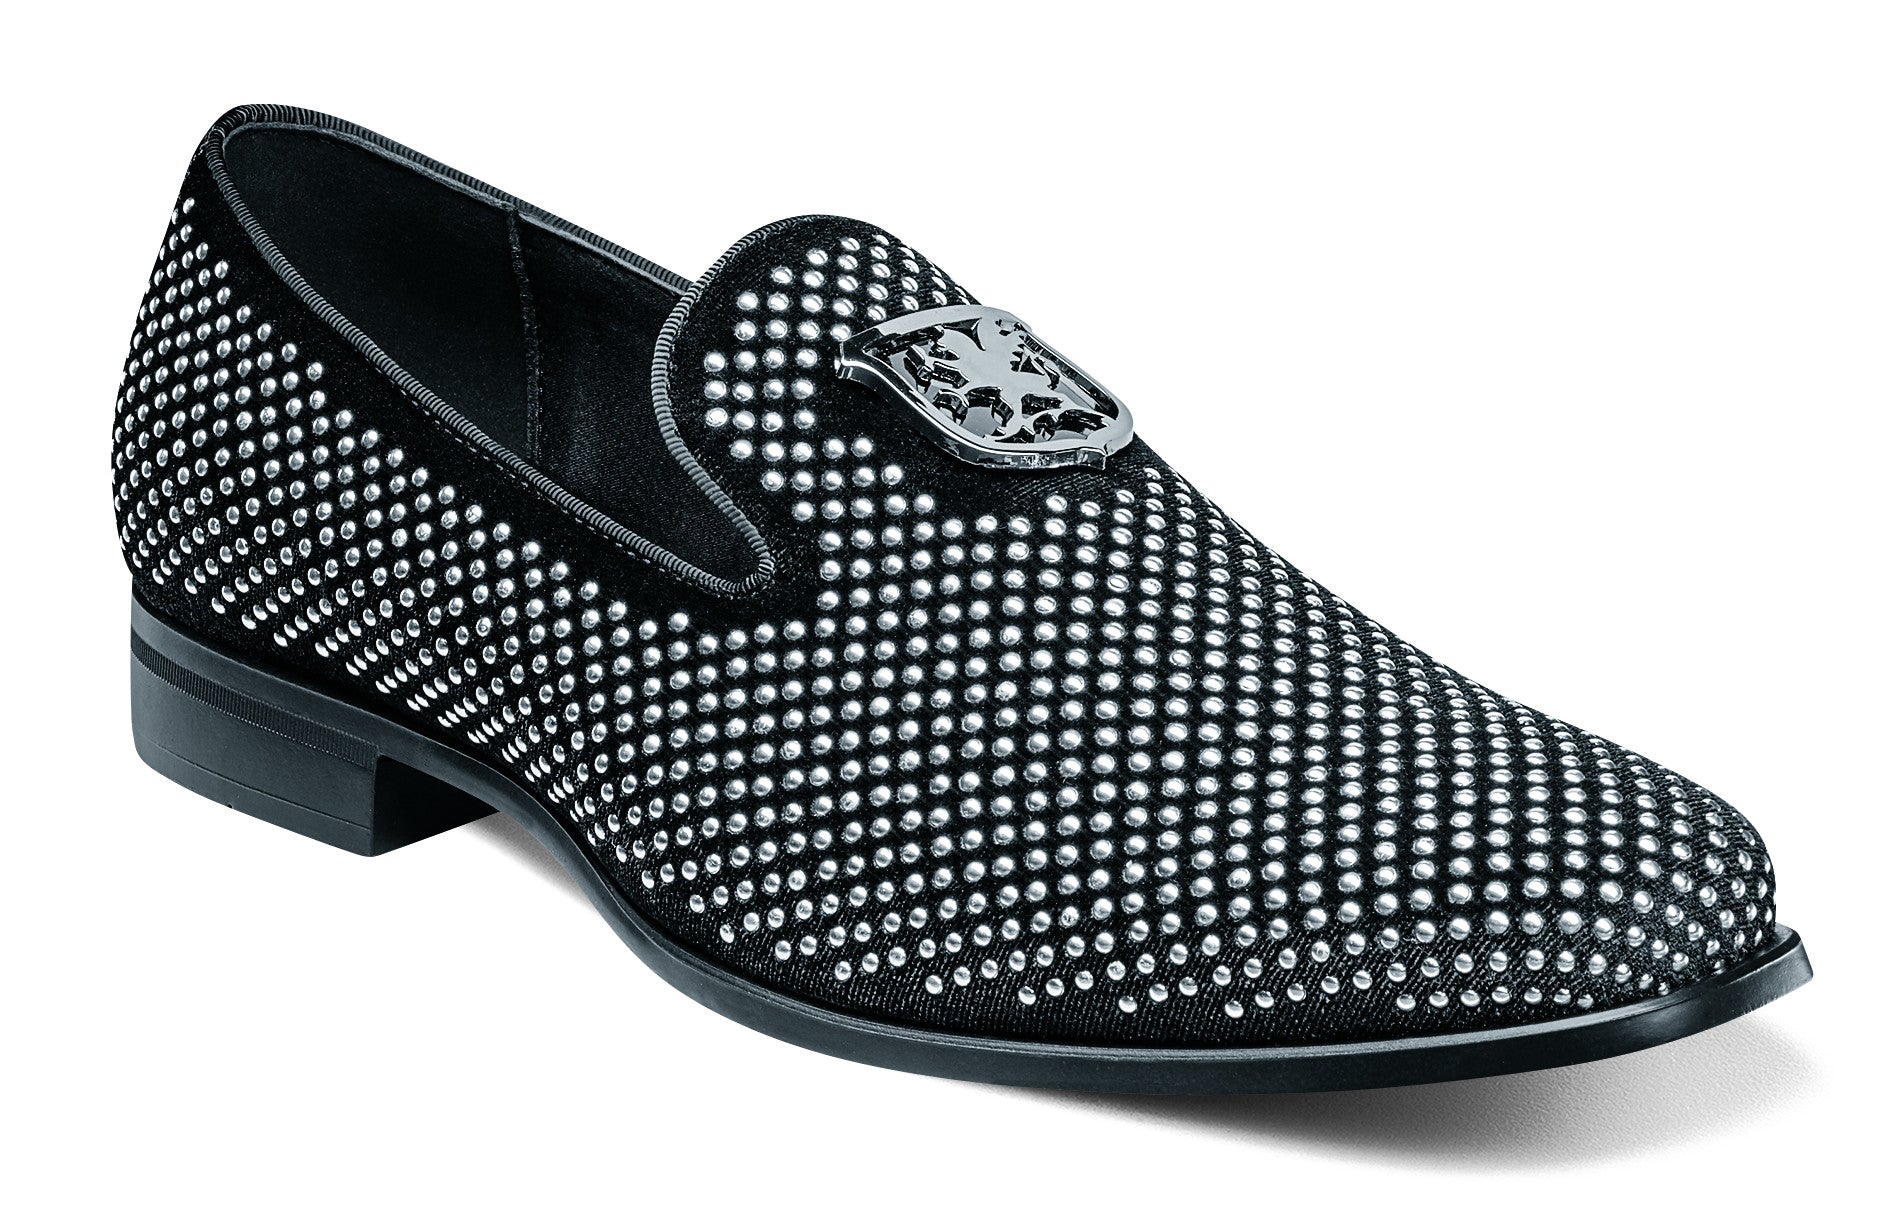 stacy adam black & silver swagger shoe